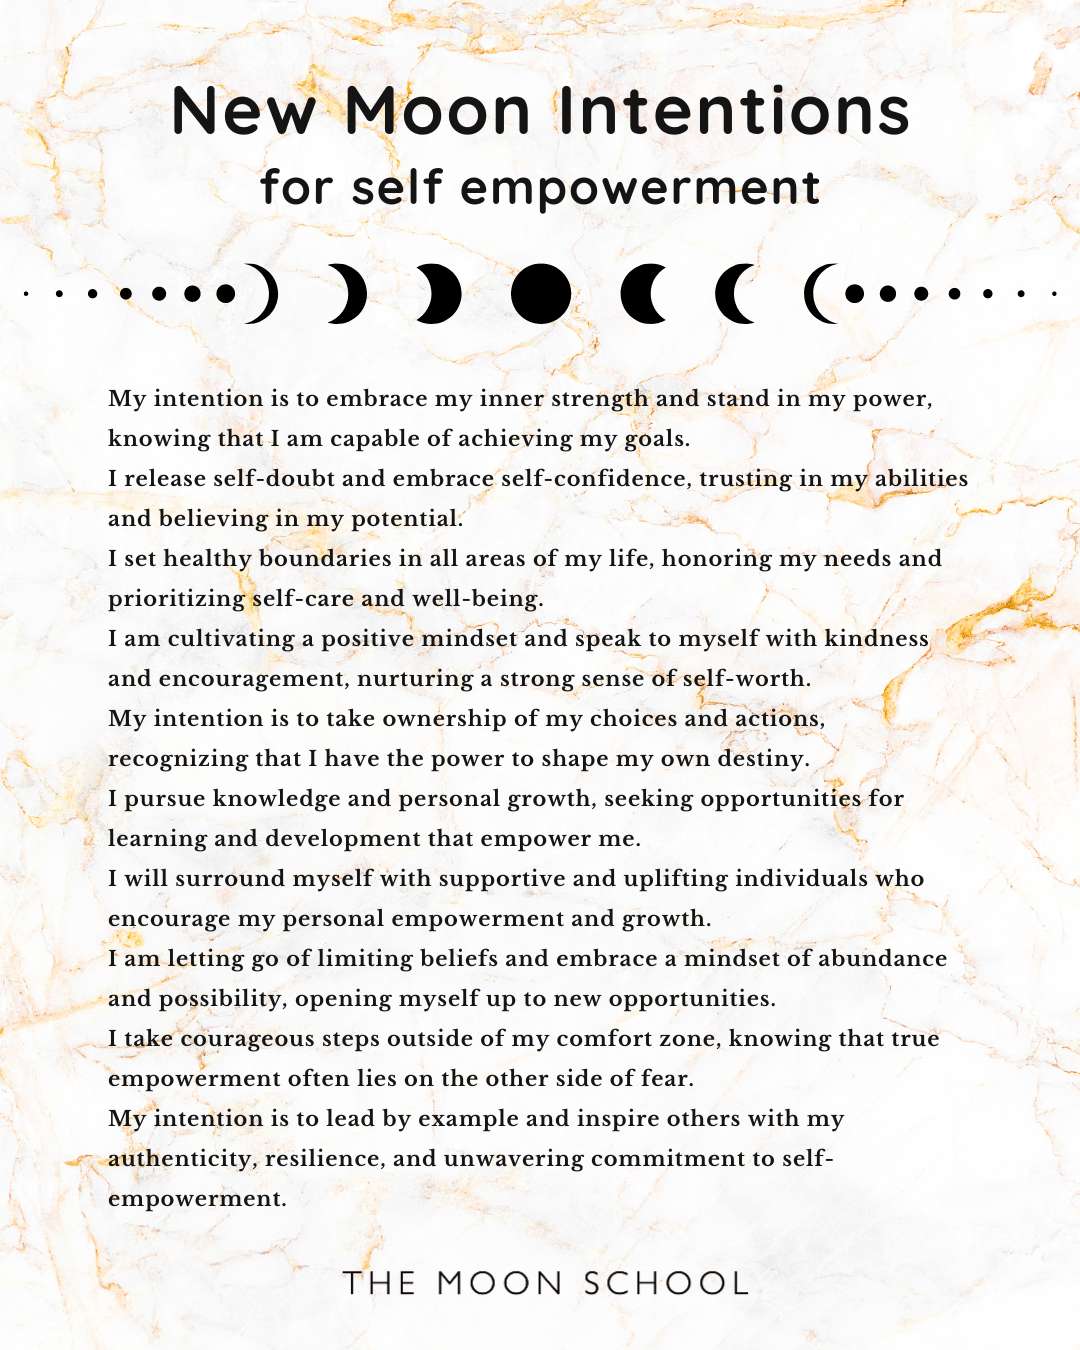 List of New Moon intentions for self empowerment